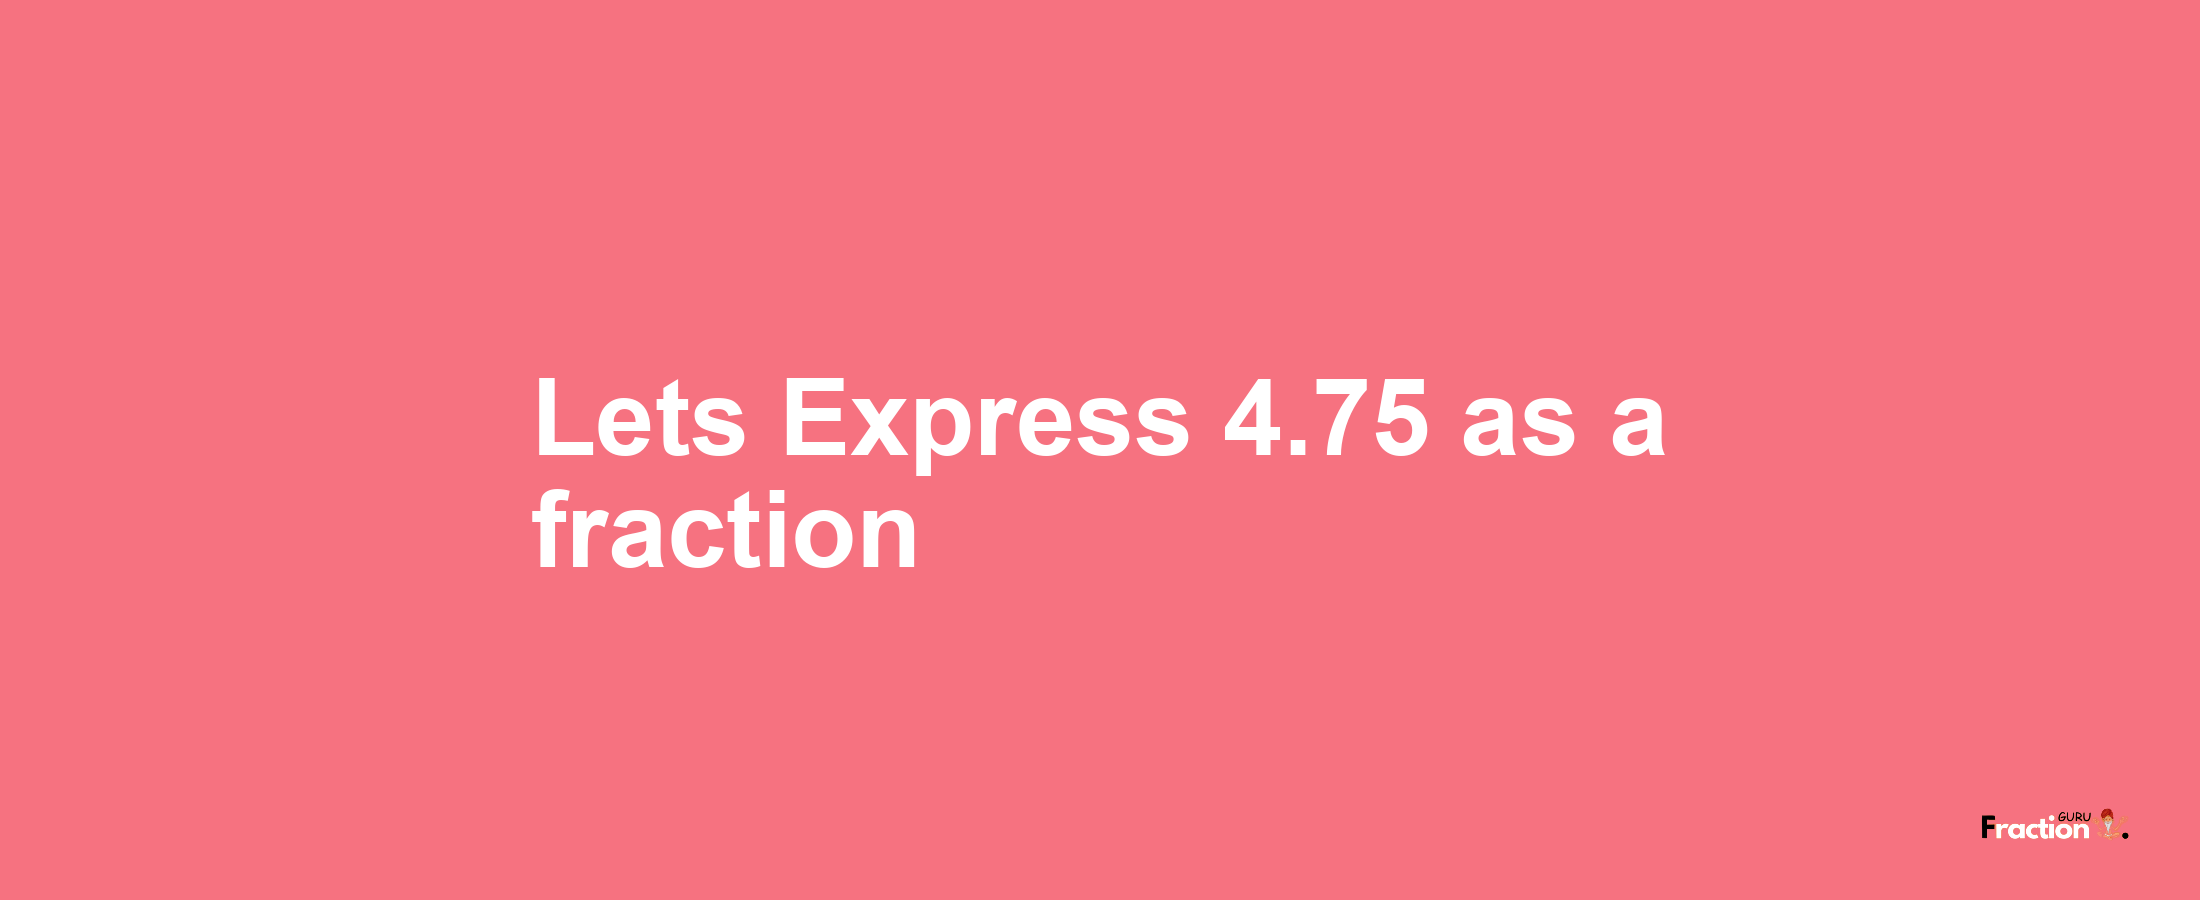 Lets Express 4.75 as afraction